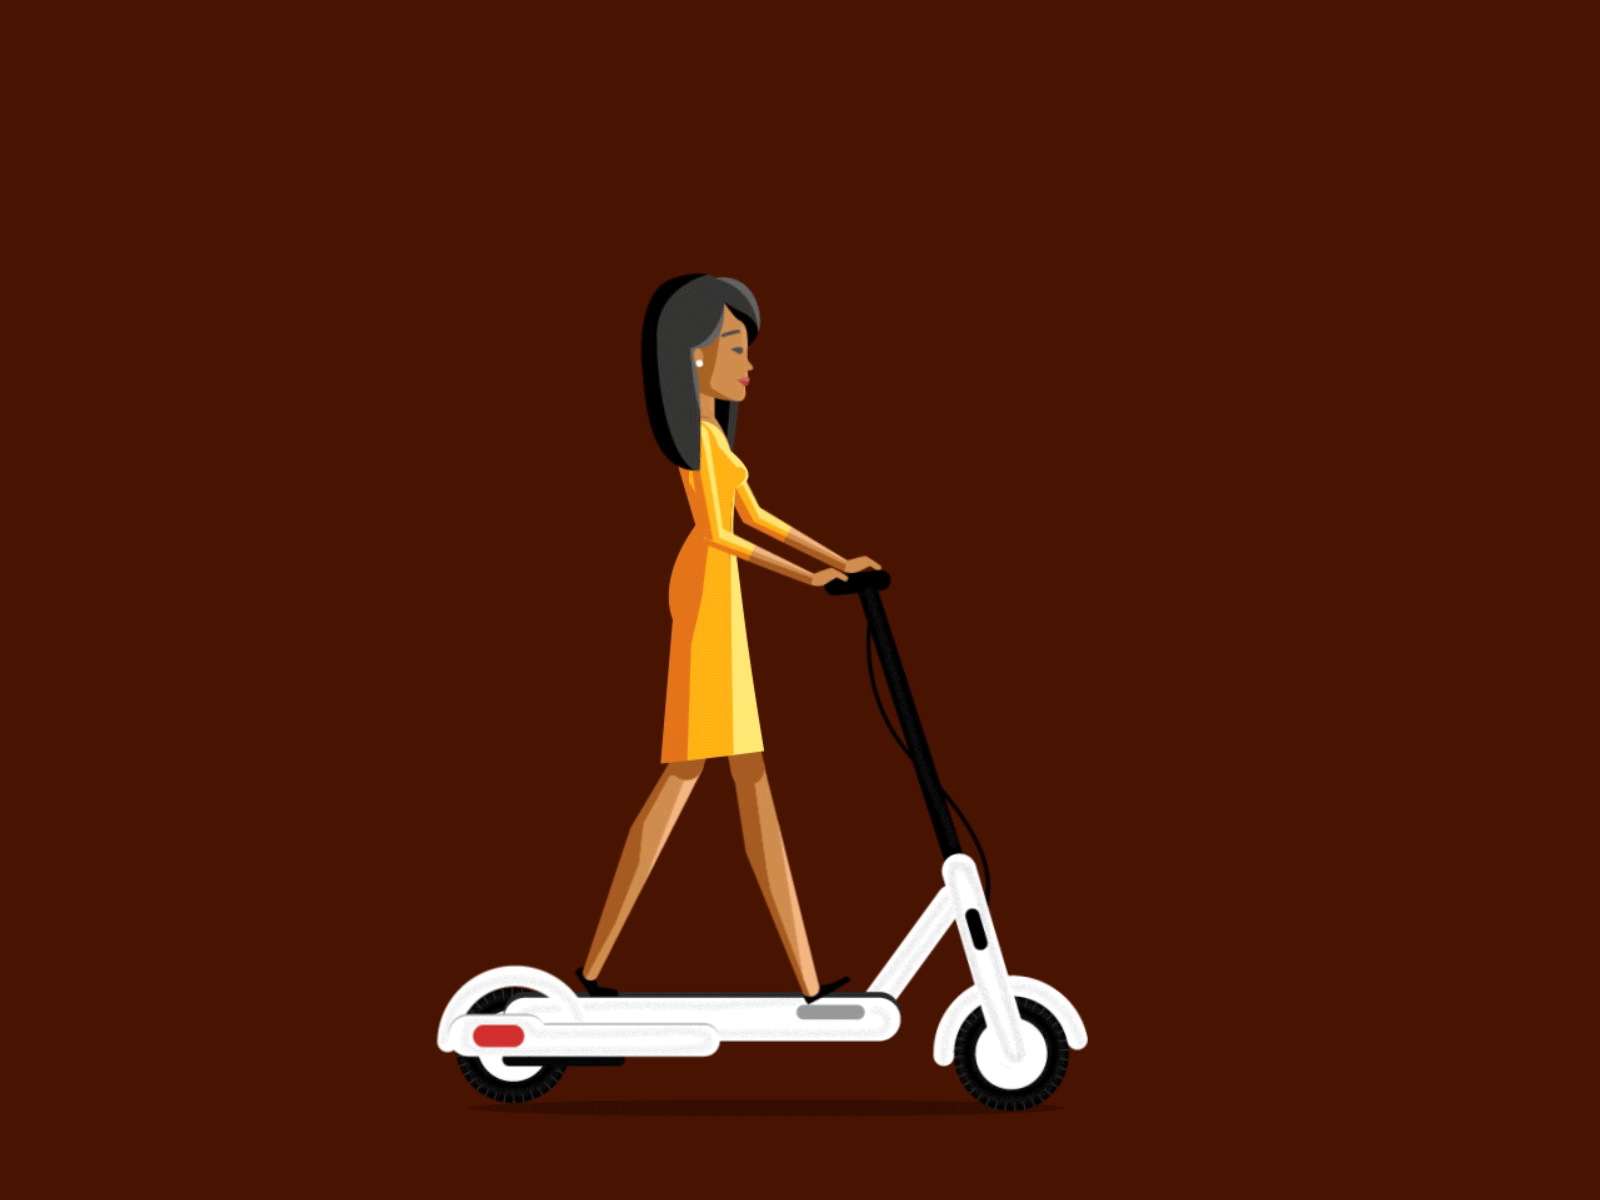 Treadmill Electric Walking Bike ae aftereffects ai animation creative design dribbble dribbleshot gif girl character girl illustration graphic graphic design identity pinterest trending